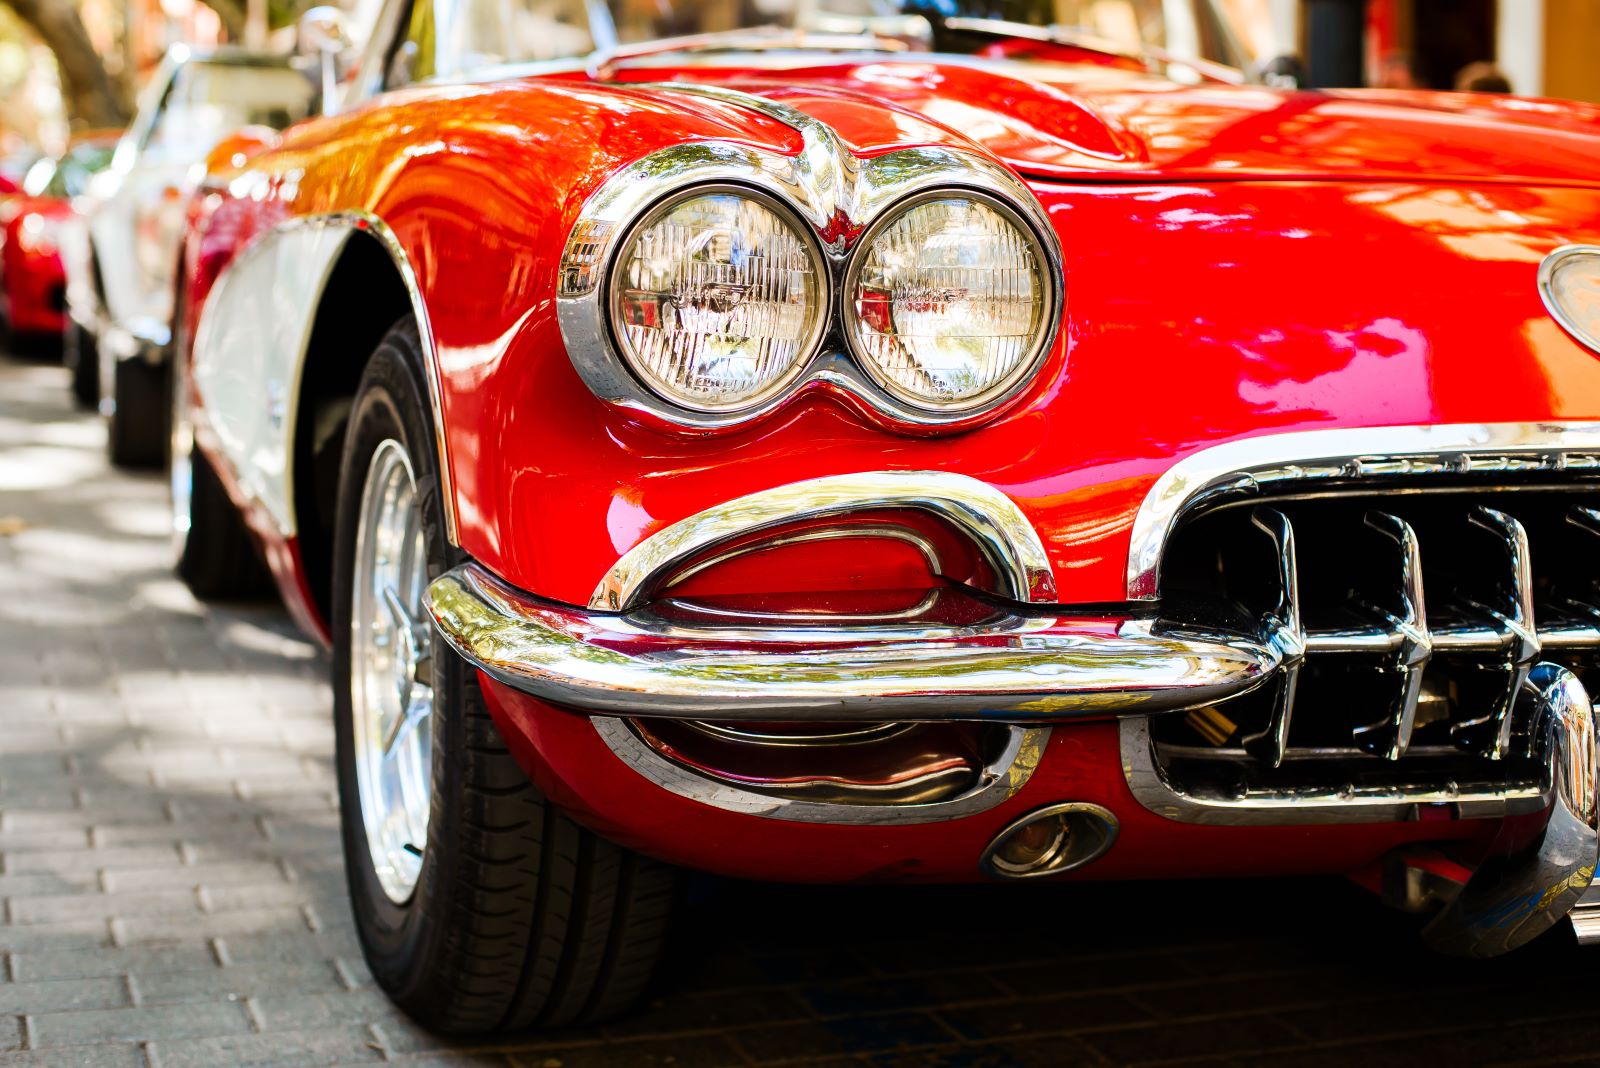 Image Credit: Shutterstock / bodiaphvideo <p>The state of your classic car plays a crucial role in the insurance process. Some insurers require a professional appraisal to assess the car’s condition and authenticity.</p>